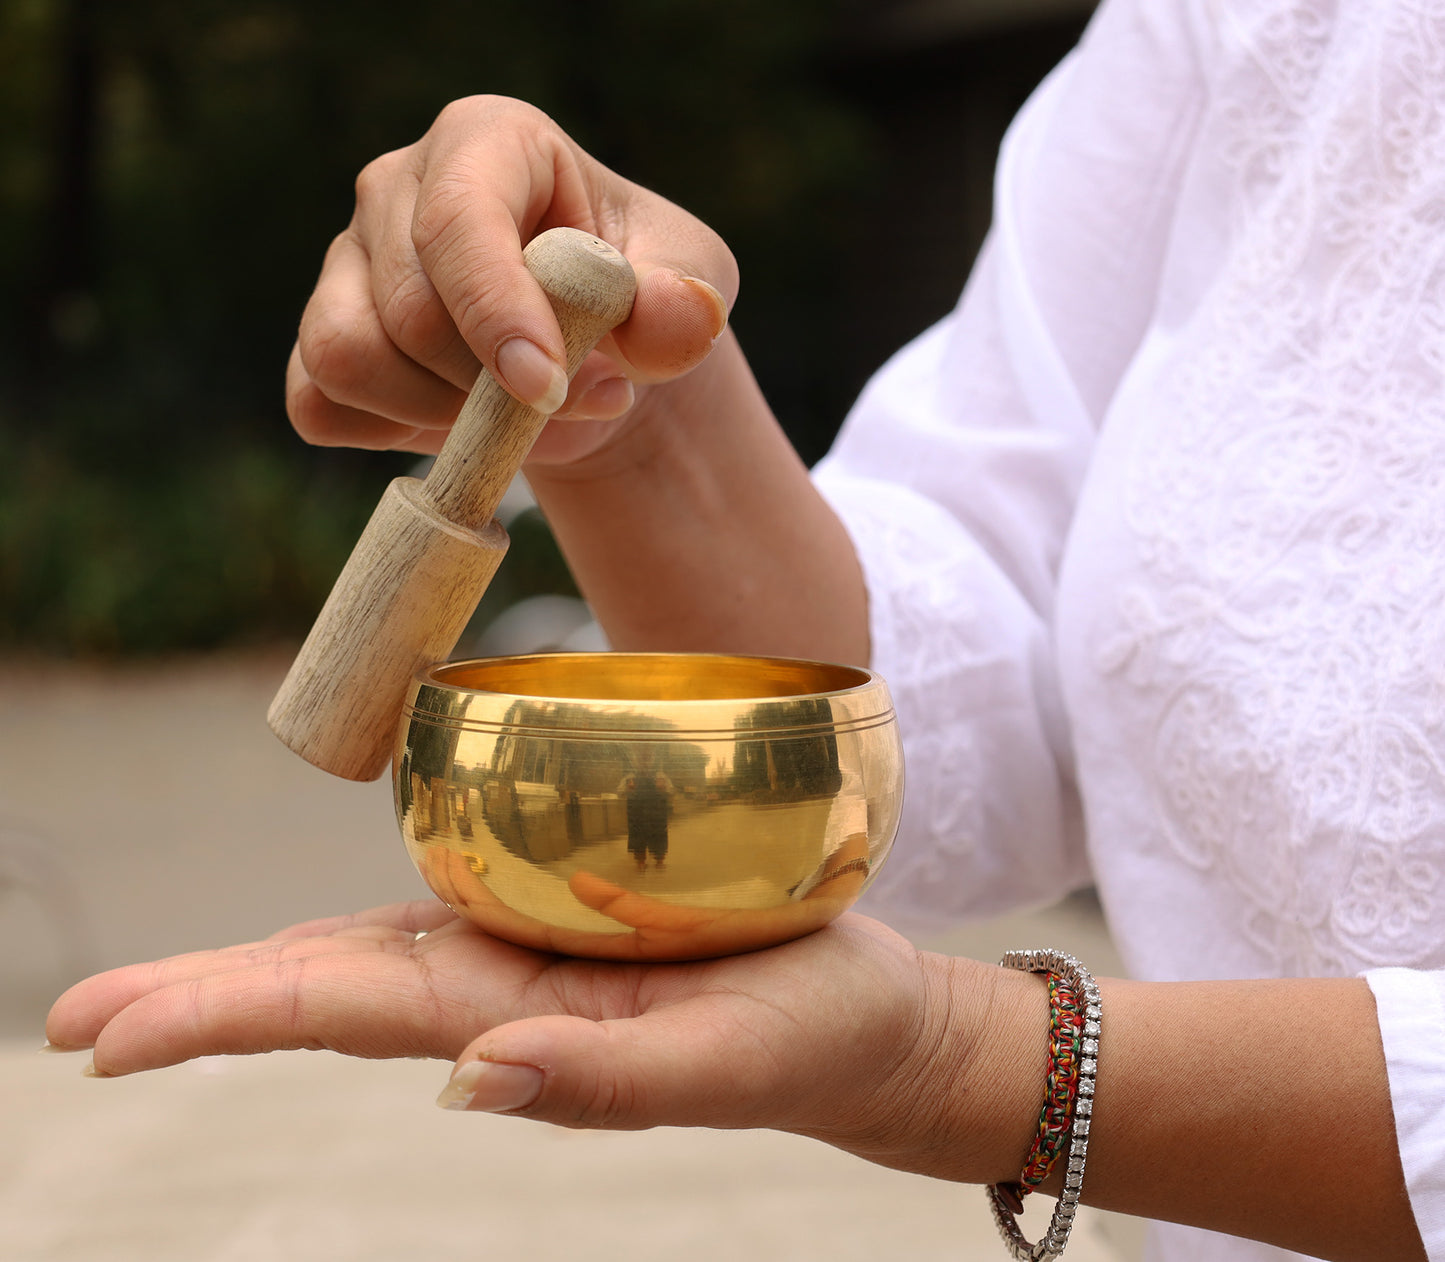 Tibetan Ring Gong Singing Bowl Complete Set ~ With Mallet and Donut Cushion~ For Meditation, Chakra Healing, Prayer, Yoga